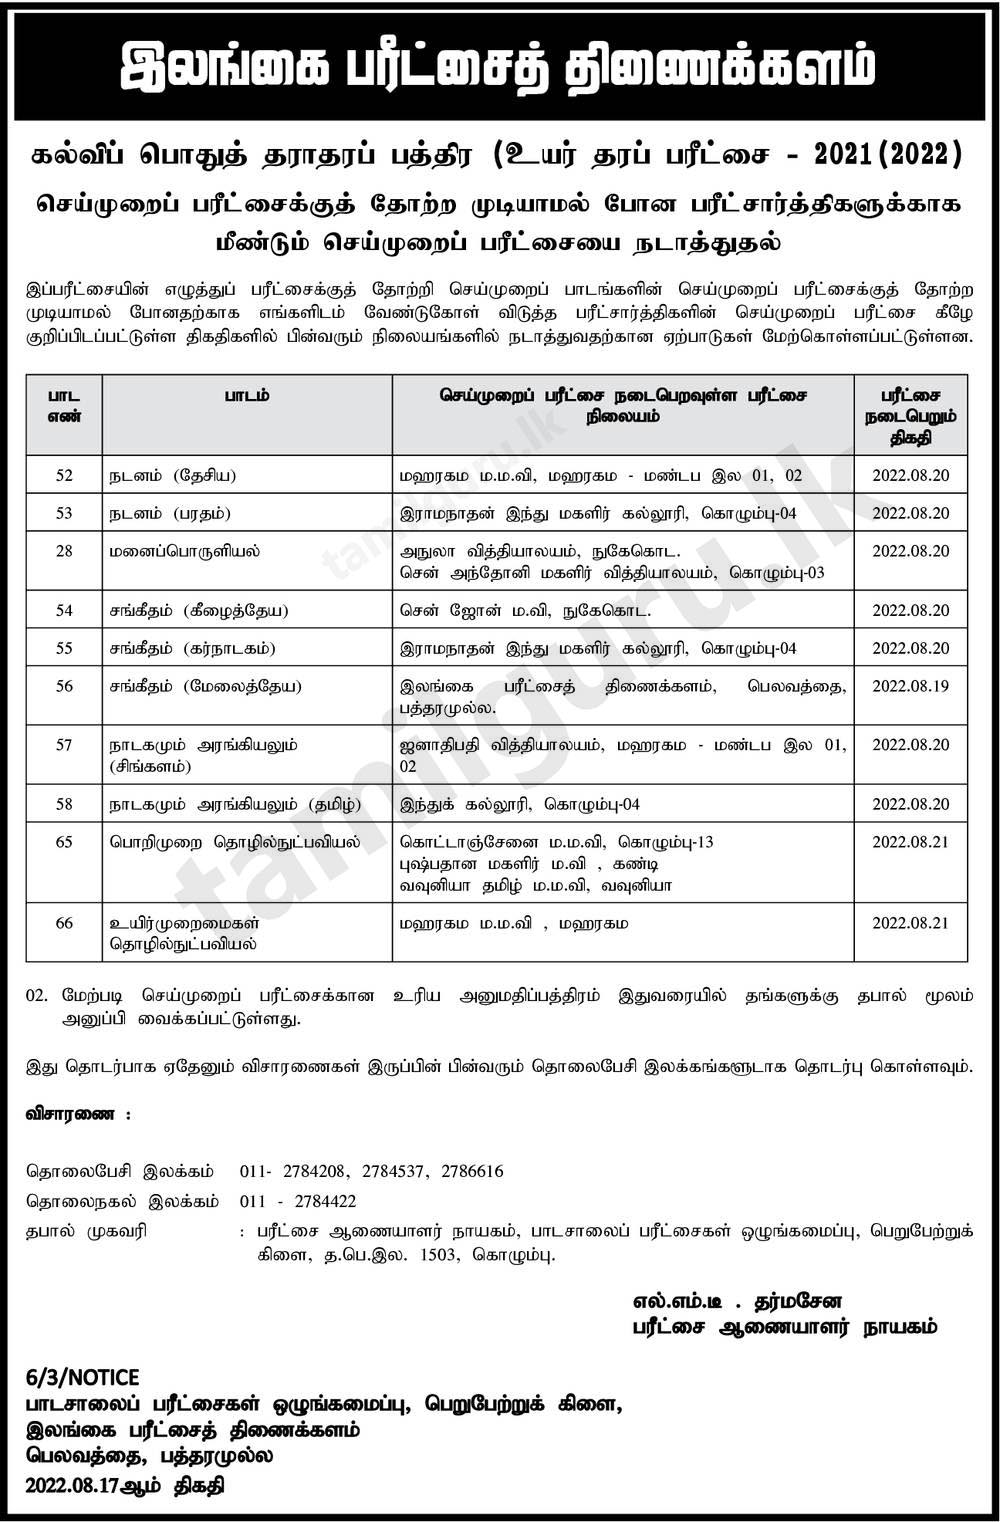 Time Table for Practical Tests (August) - GCE AL Examination 2021 (2022) (Notice in Tamil)